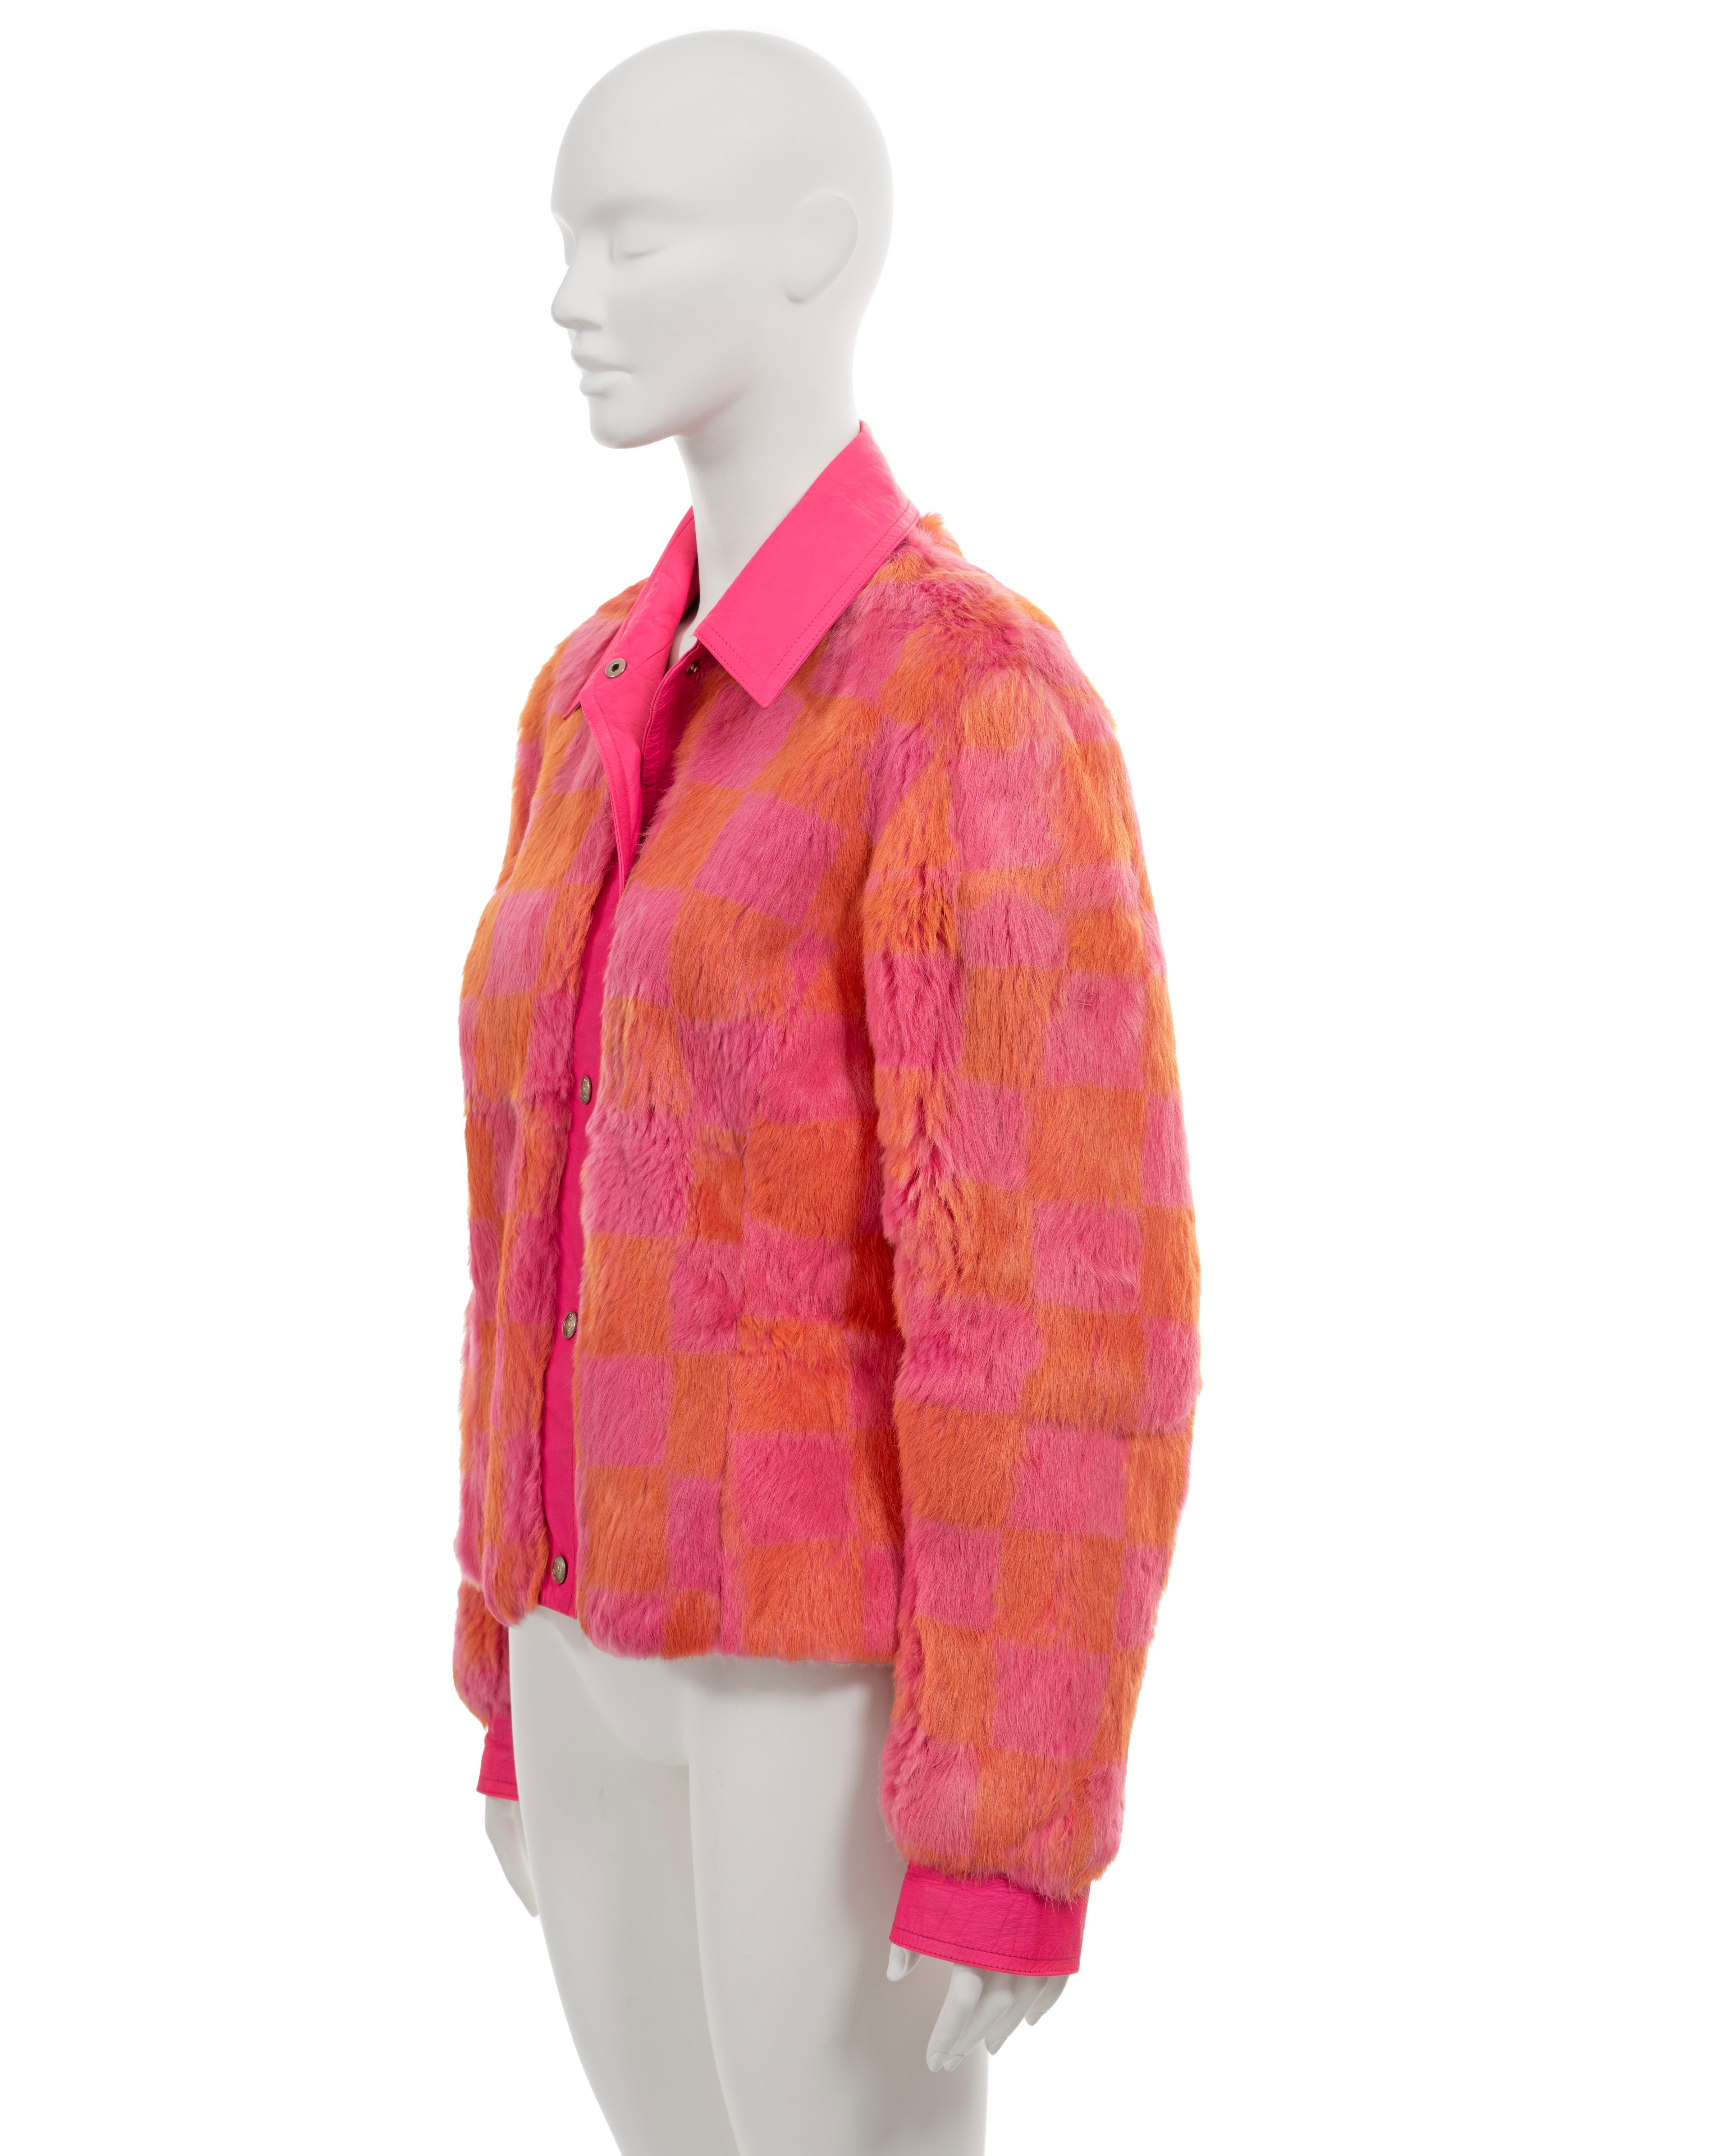 Christian Dior by John Galliano pink and orange fur shirt jacket, fw 2001 For Sale 3